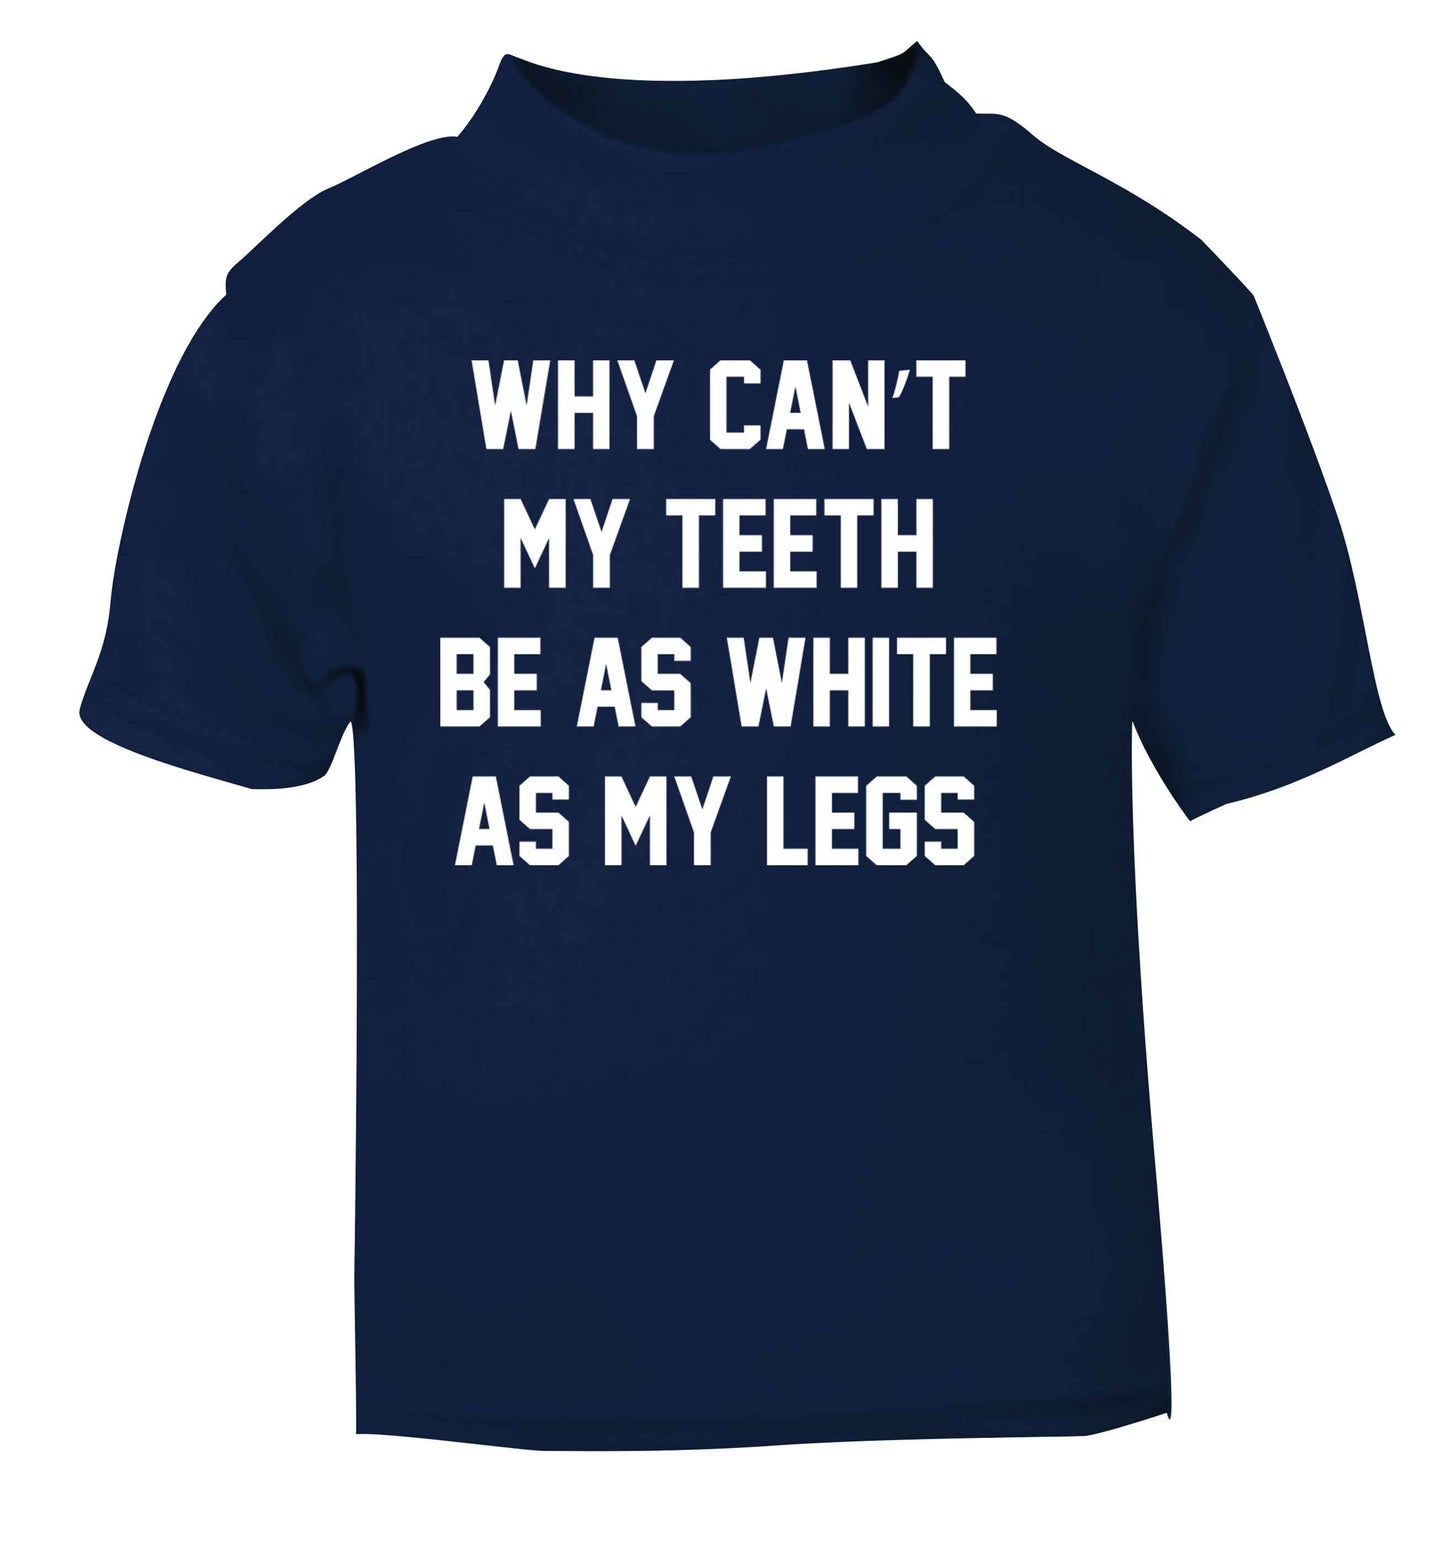 Why can't my teeth be as white as my legs navy Baby Toddler Tshirt 2 Years